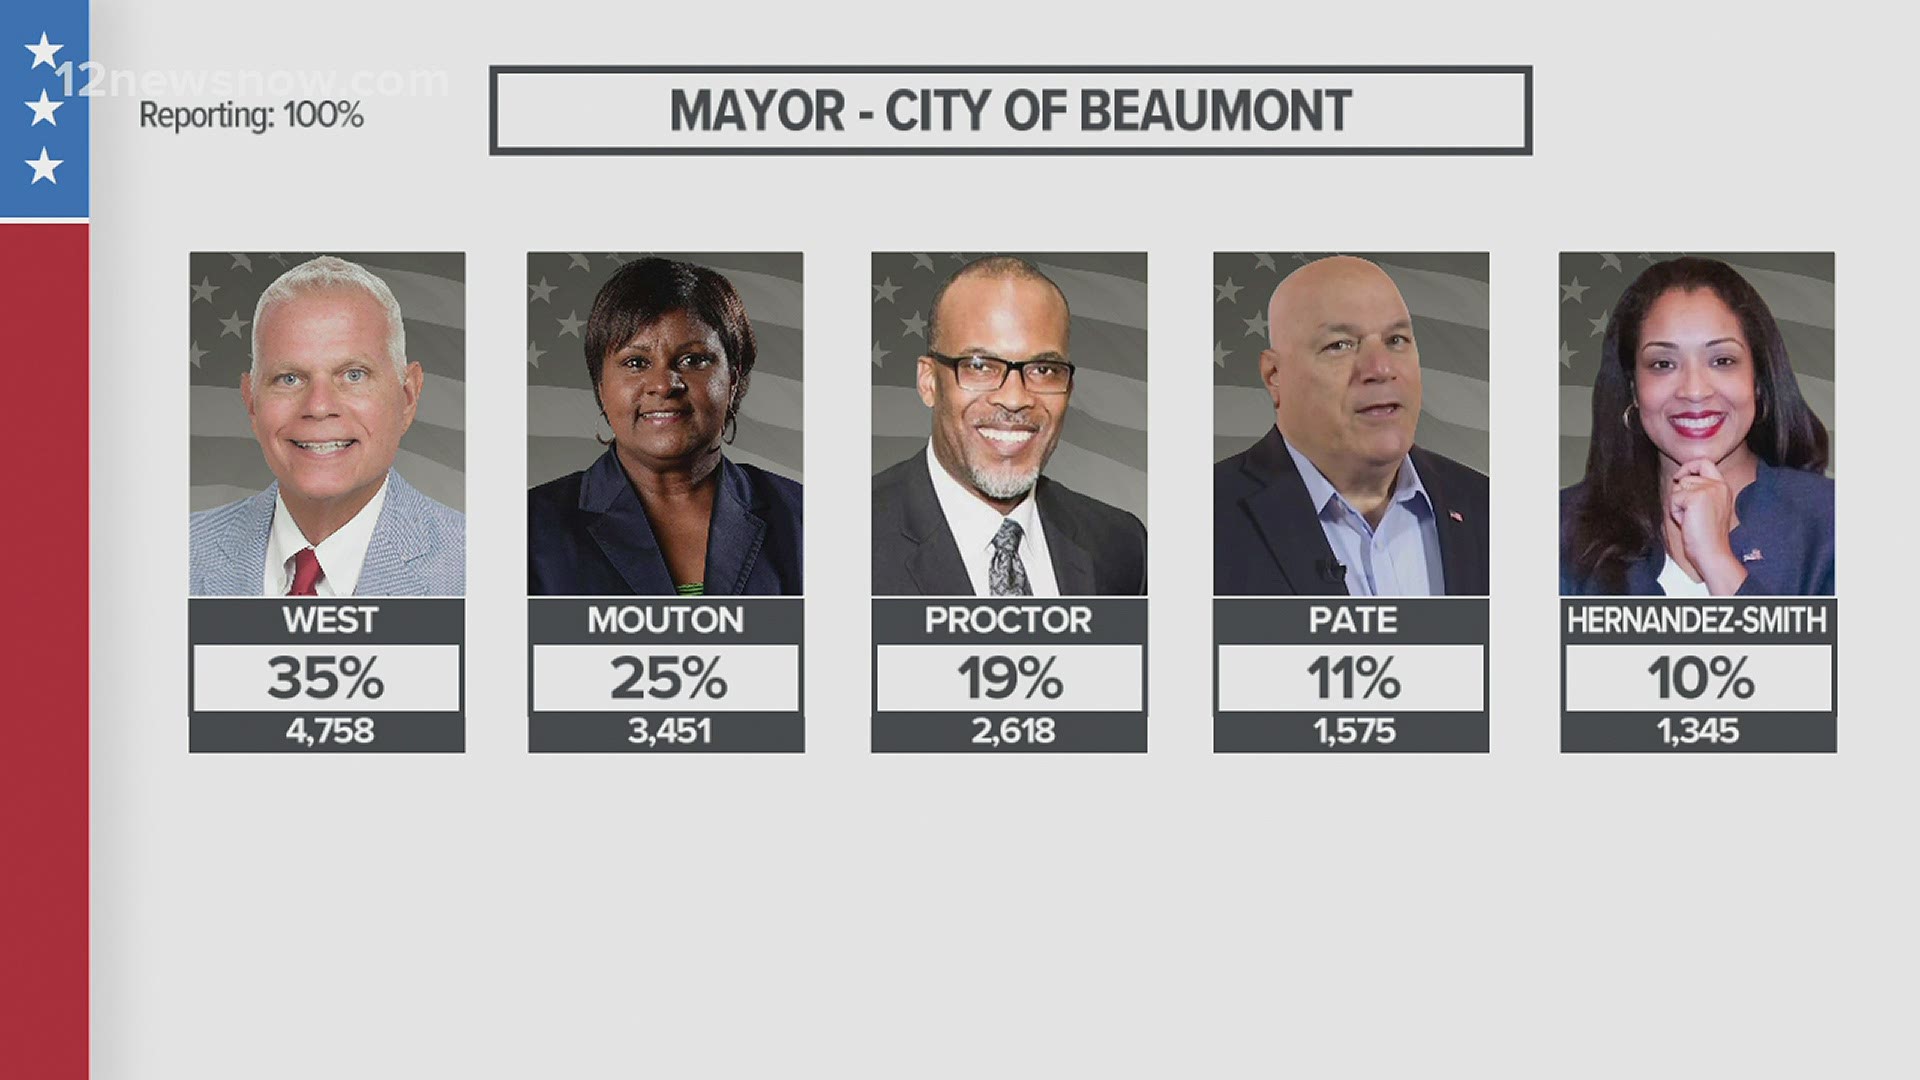 It's going to take a runoff election to decide who will become Beaumont's newest mayor since 2007.